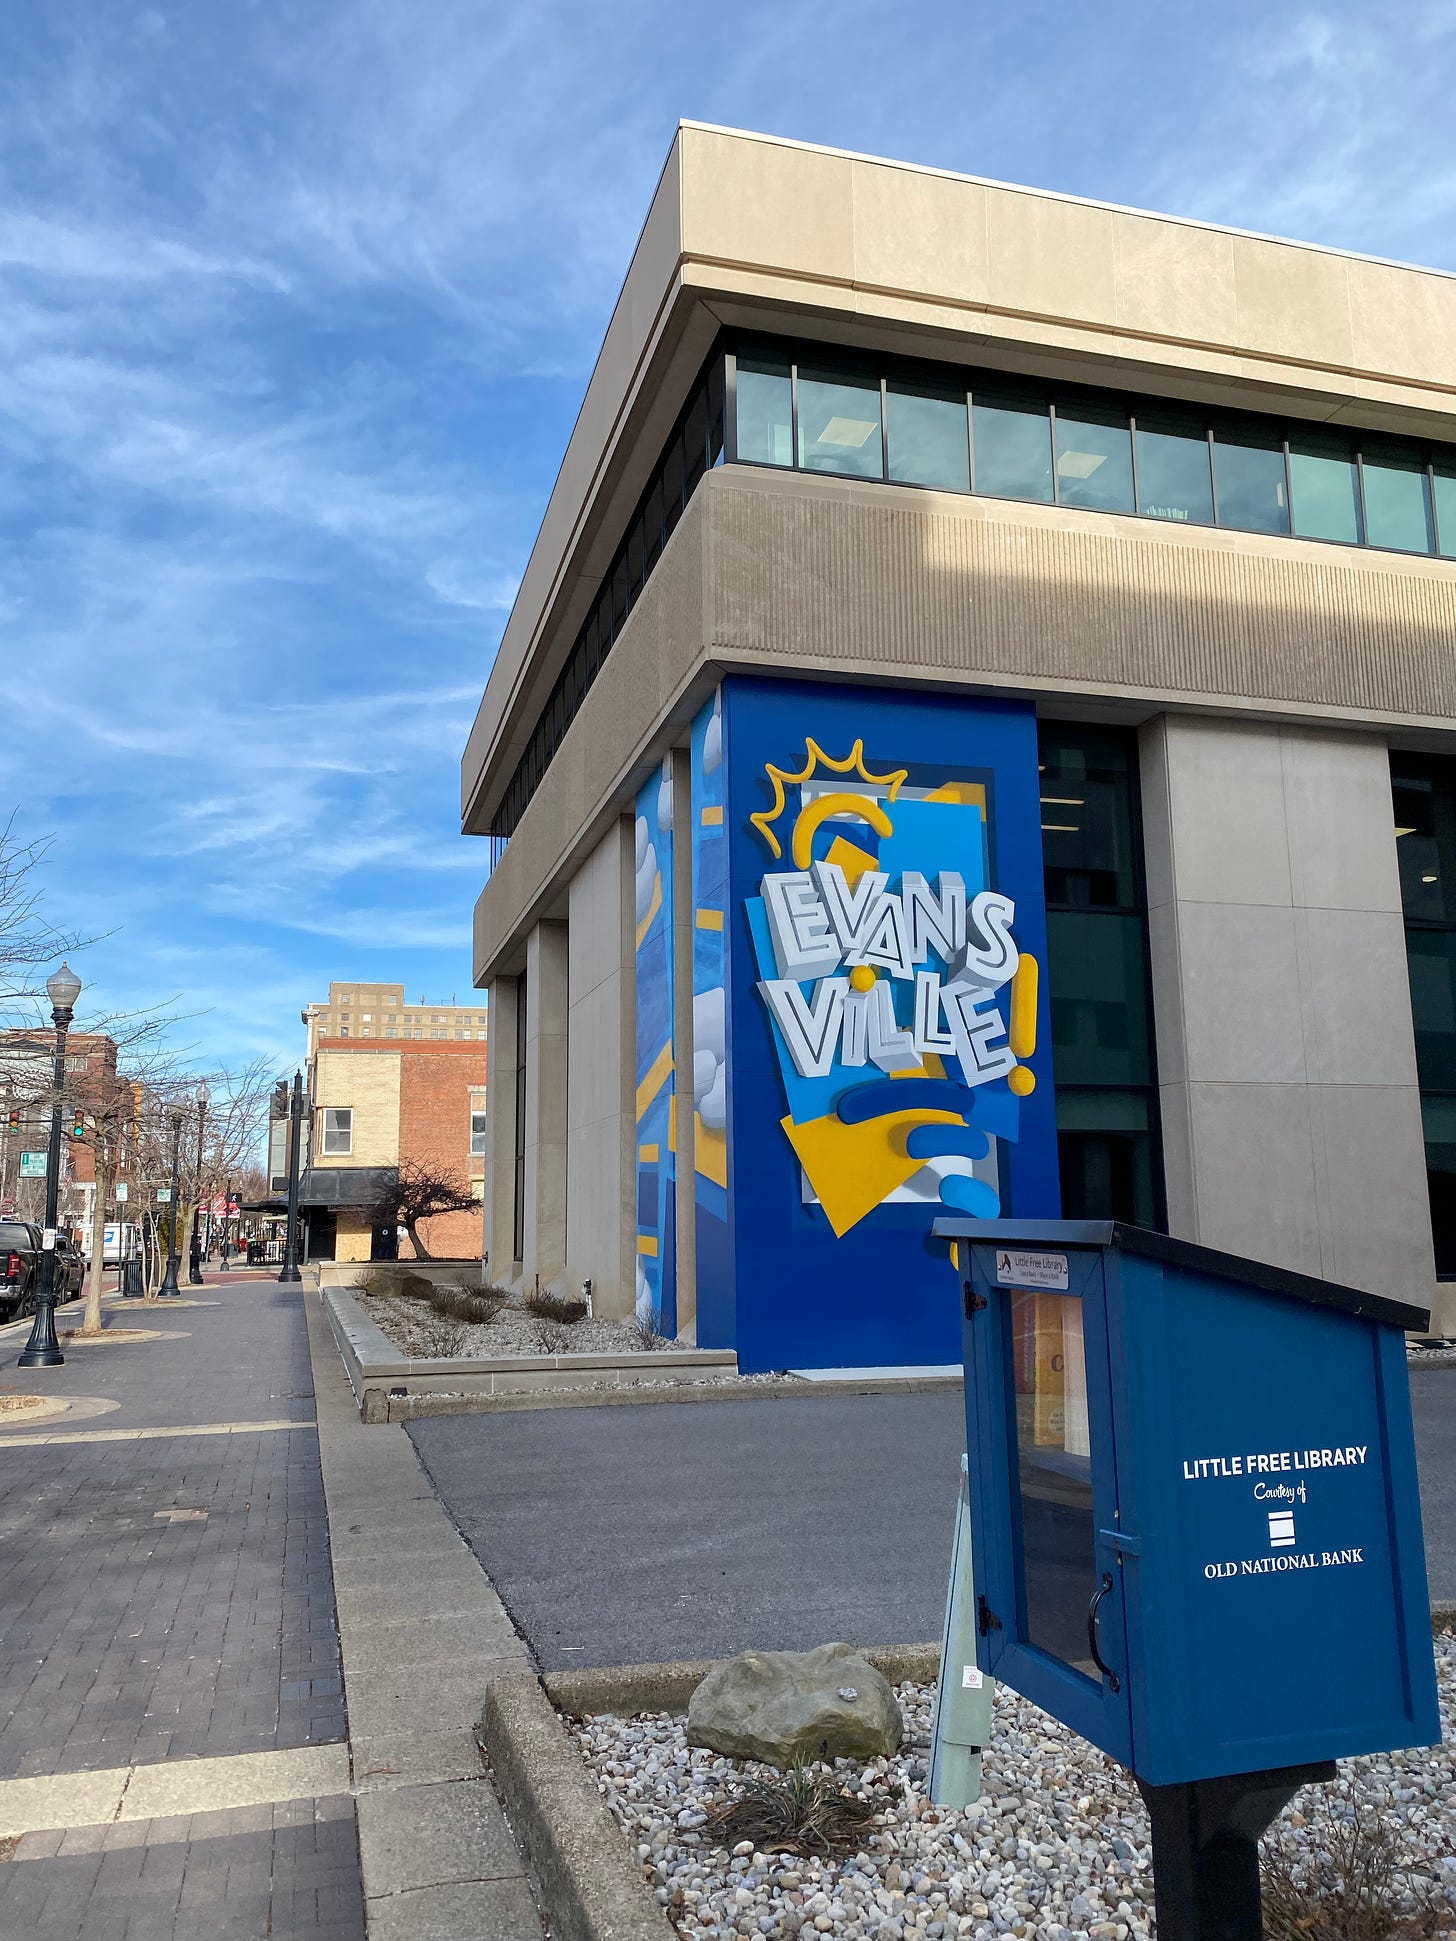 A picture looking down a busy downtown street with a blue and yellow mural with the town name Evansville